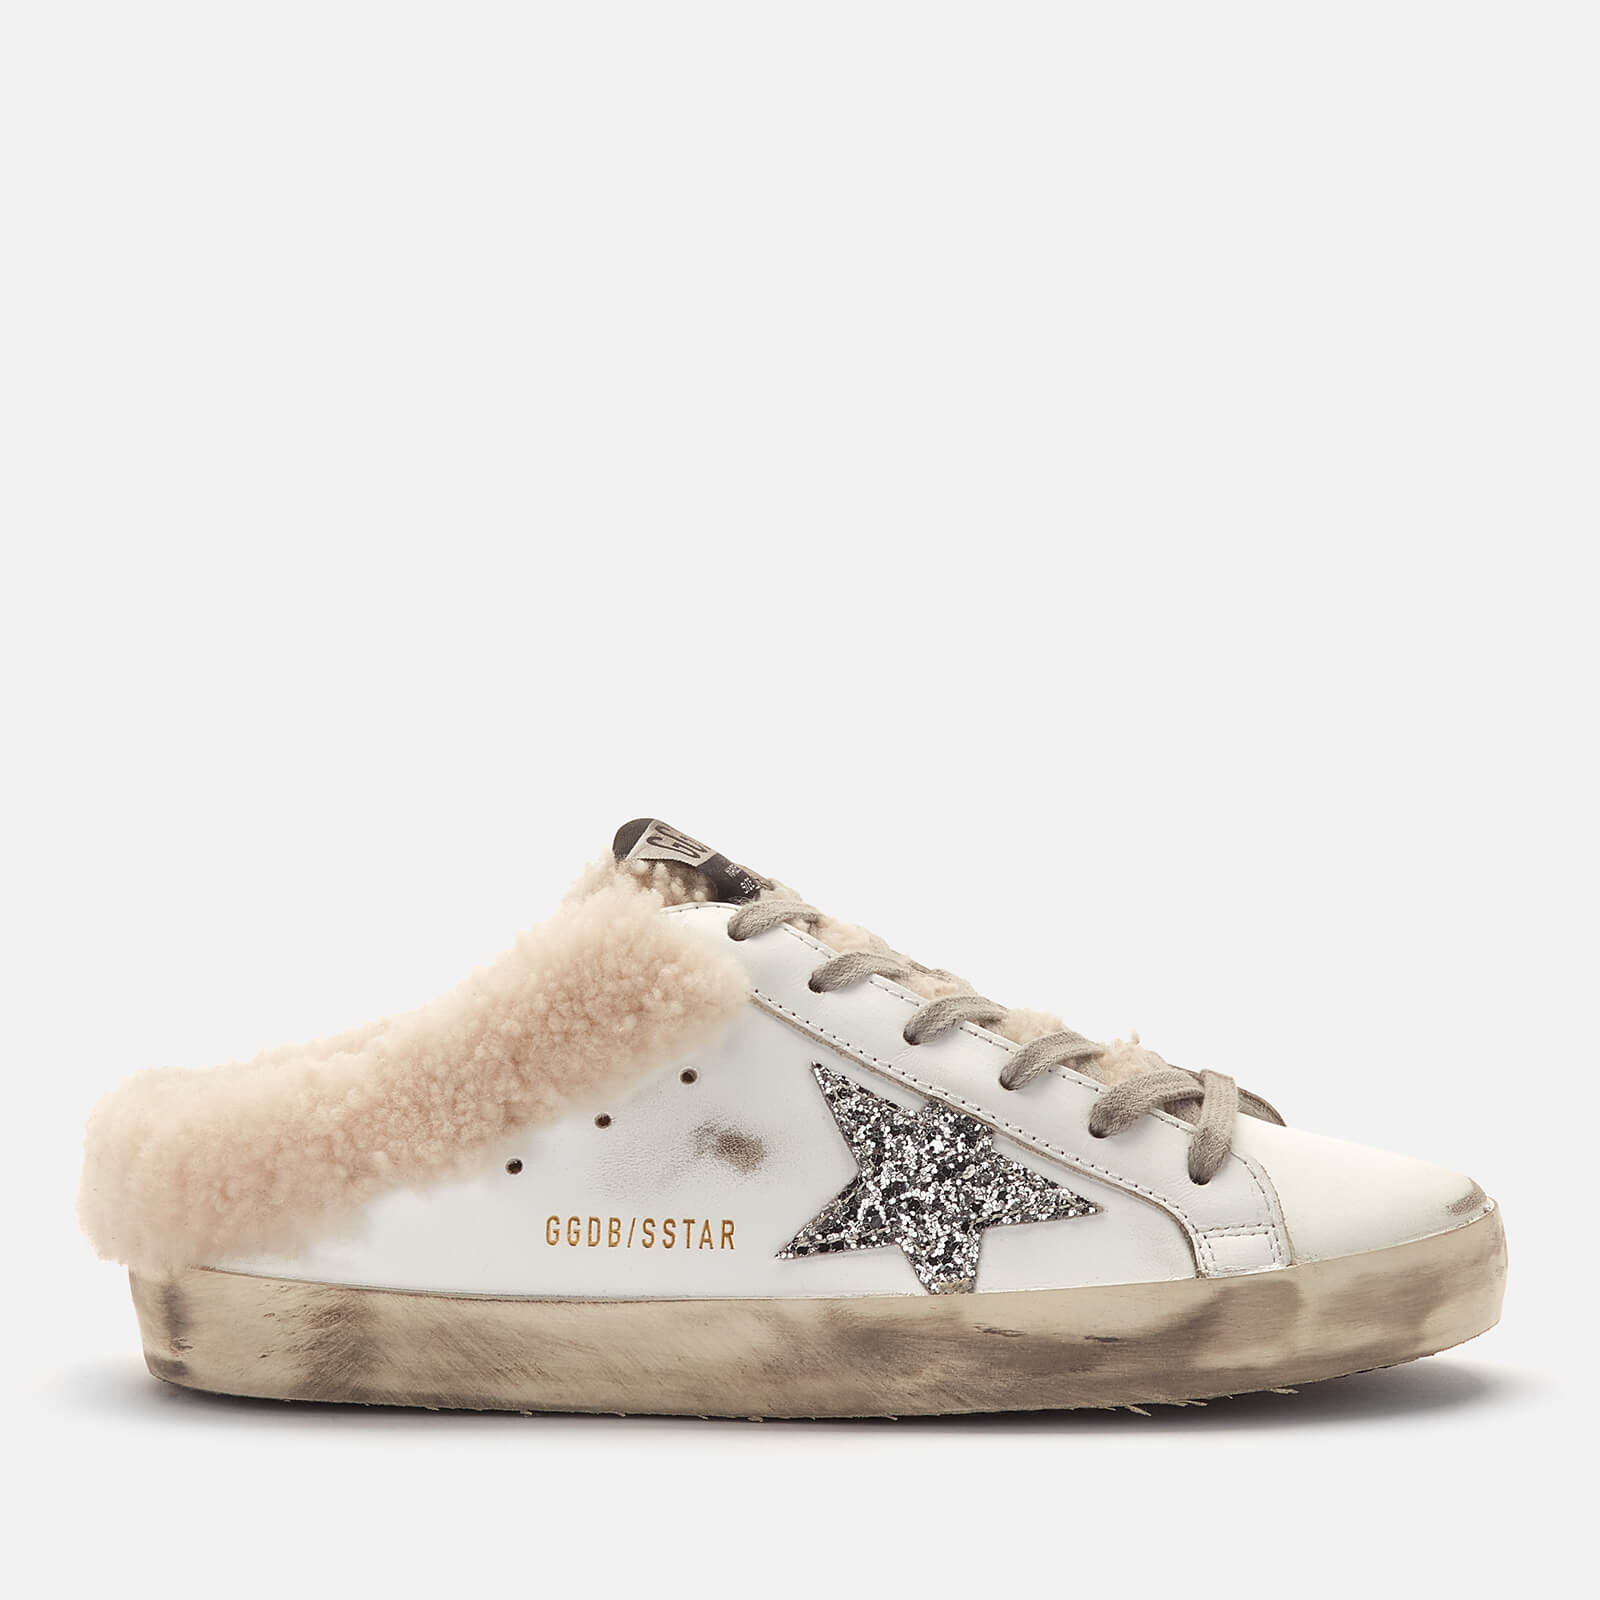 Golden Goose Deluxe Brand Women's Superstar Sabot Leather/Shearling Slip-On Trainers - White/Silver/Beige - UK 3